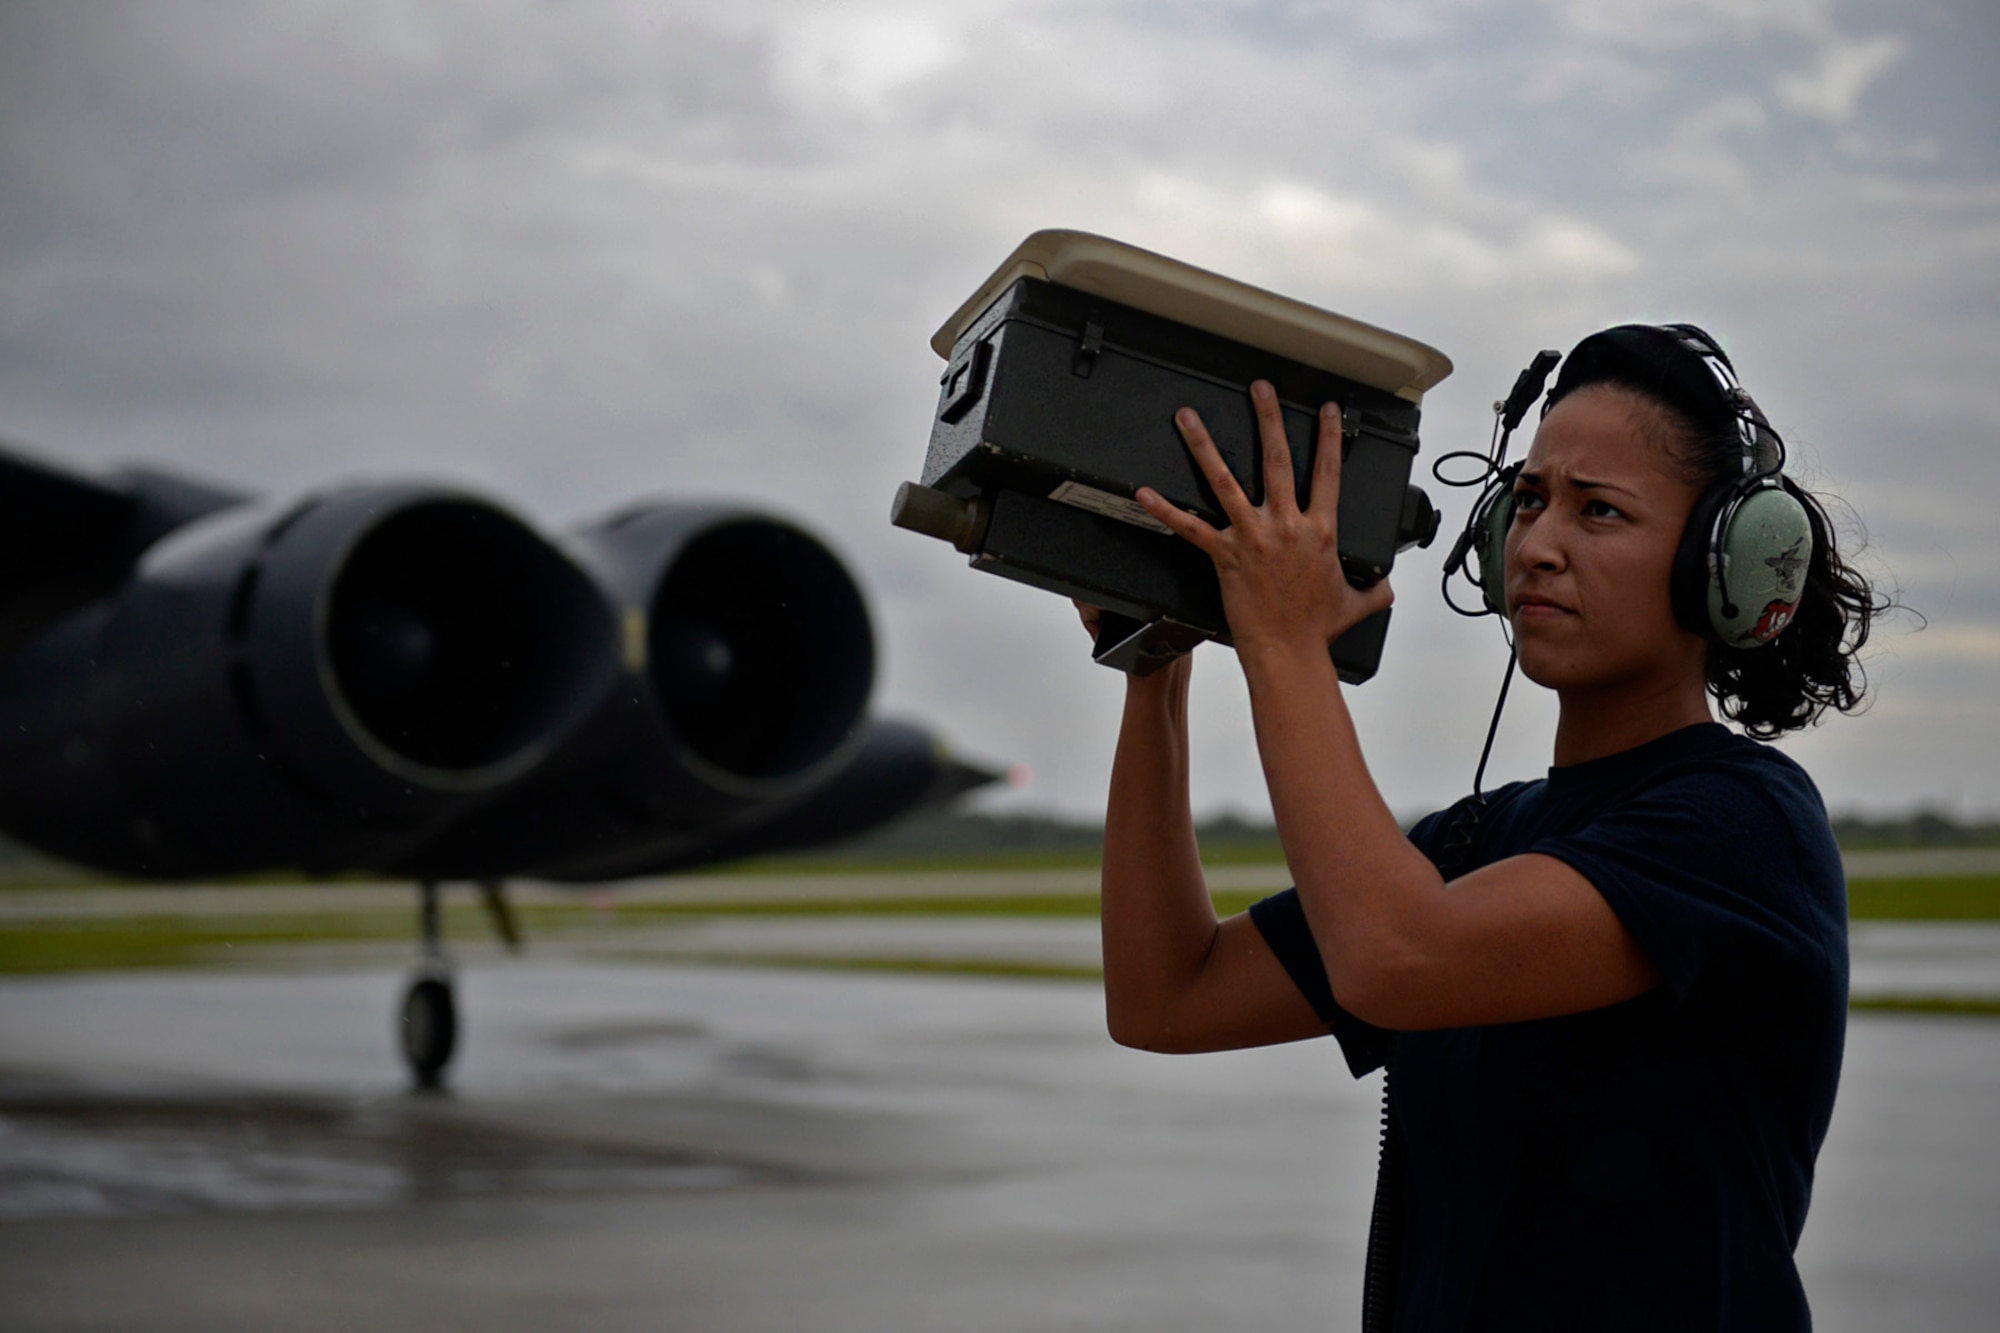 Senior Airman Alexandra Washington, communications and navigations technician assigned to the 20th Expeditionary Aircraft Maintenance Squadron, checks antennae signals on a B-52 Stratofortress before flight Aug. 22, 2015, at Andersen Air Force Base, Guam. Bomber crews with the 20th Expeditionary Bomb Squadron from Barksdale Air Force Base, Louisiana, are part of U.S. Pacific Command’s continuous bomber presence and support ongoing operations in the Indo-Asia-Pacific region. (U.S. Air Force photo by Staff Sgt. Alexander W. Riedel/Released)